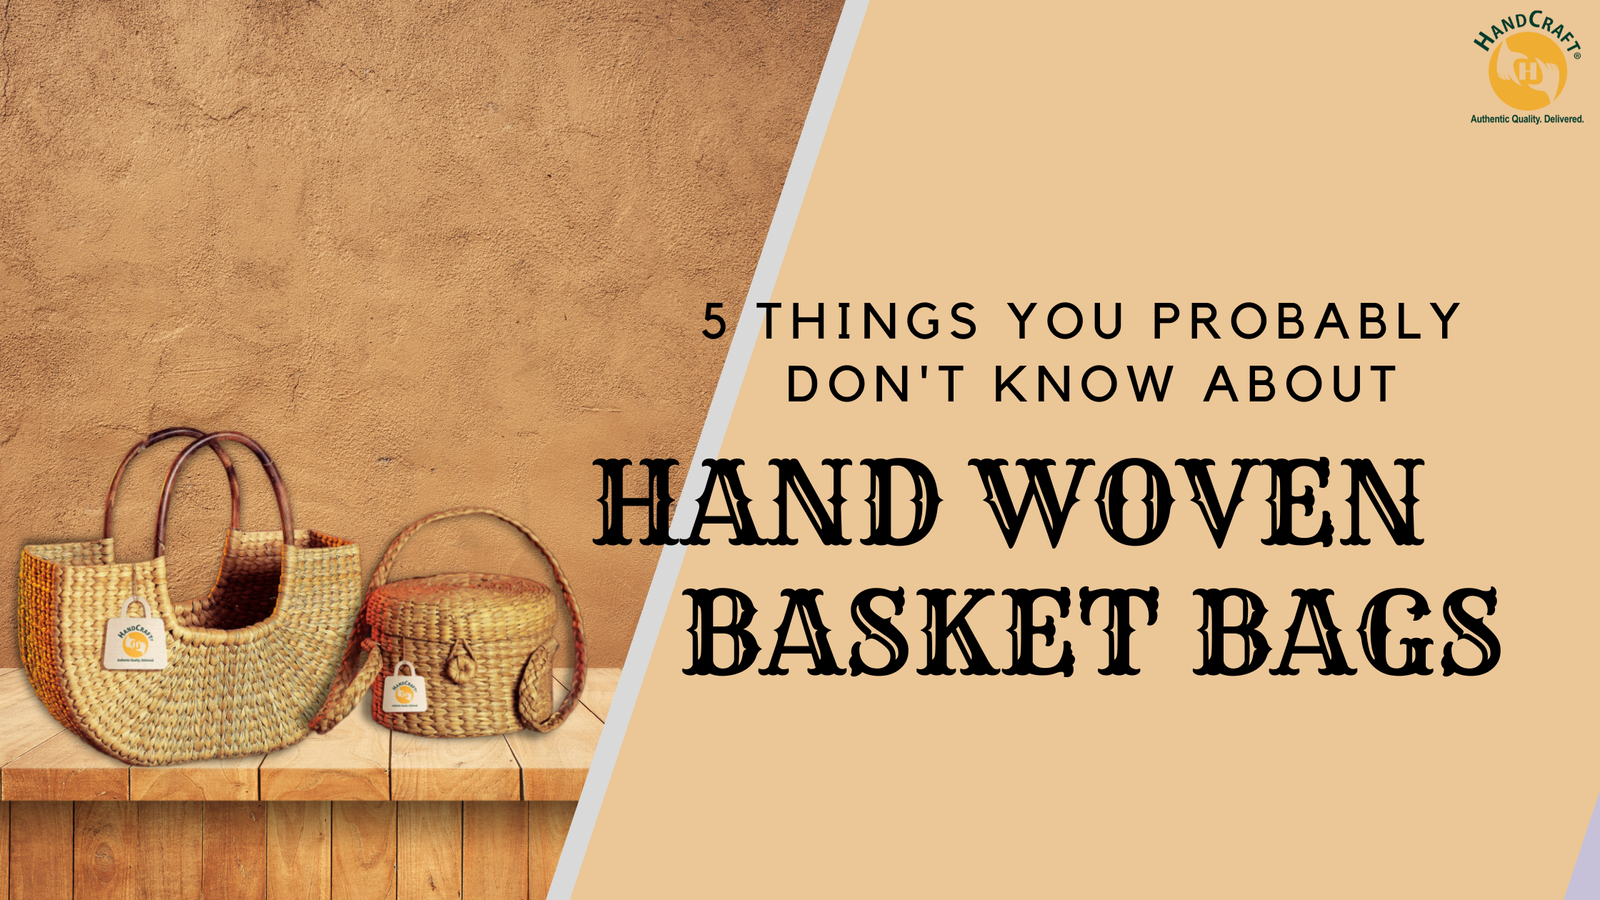 5 Things You Probably Don’t Know About Handwoven Basket Bags